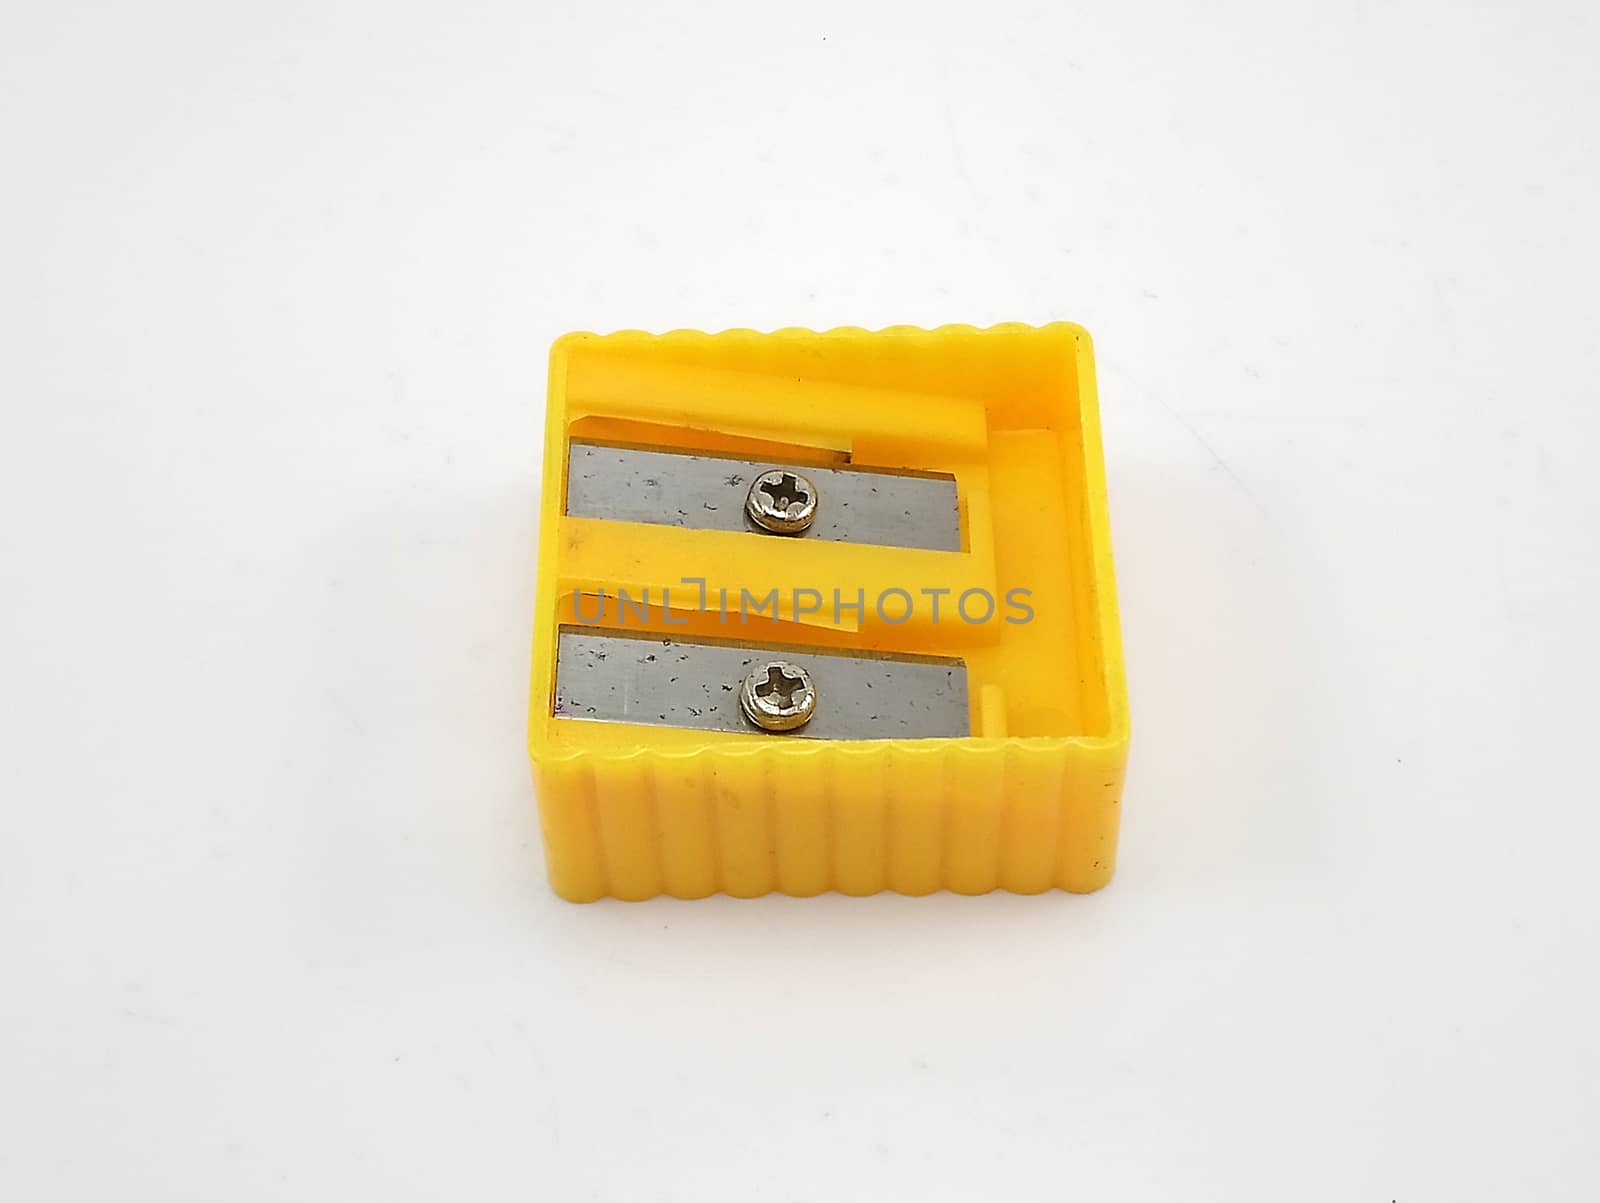 Wood pencil sharpener school supply plastic yellow use to sharpen the tip of pencil